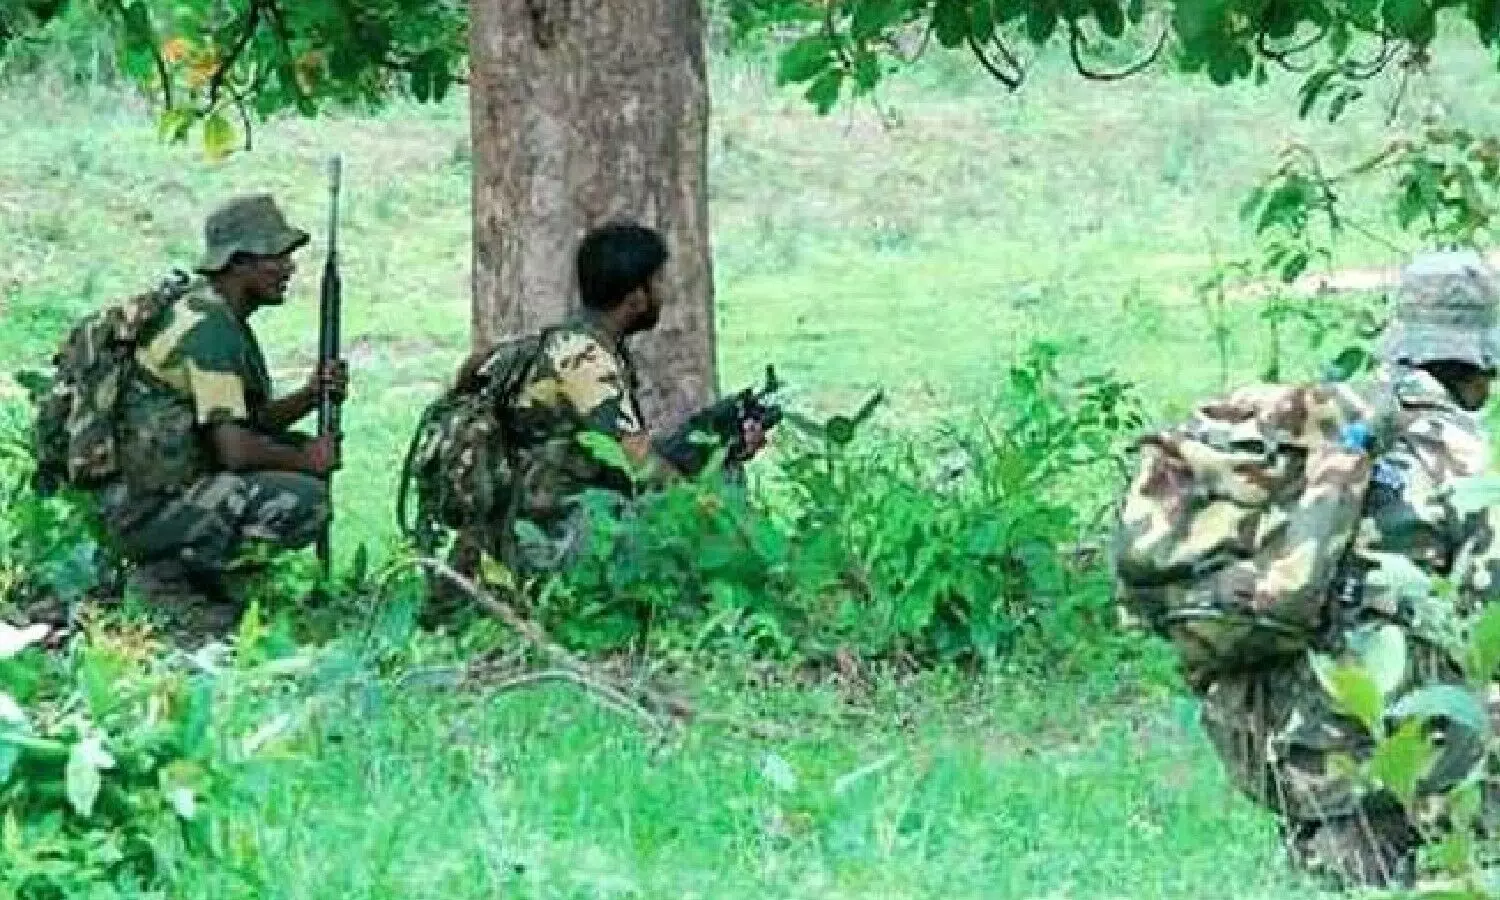 There has been an encounter between Naxalites and security personnel in Chhattisgarh.